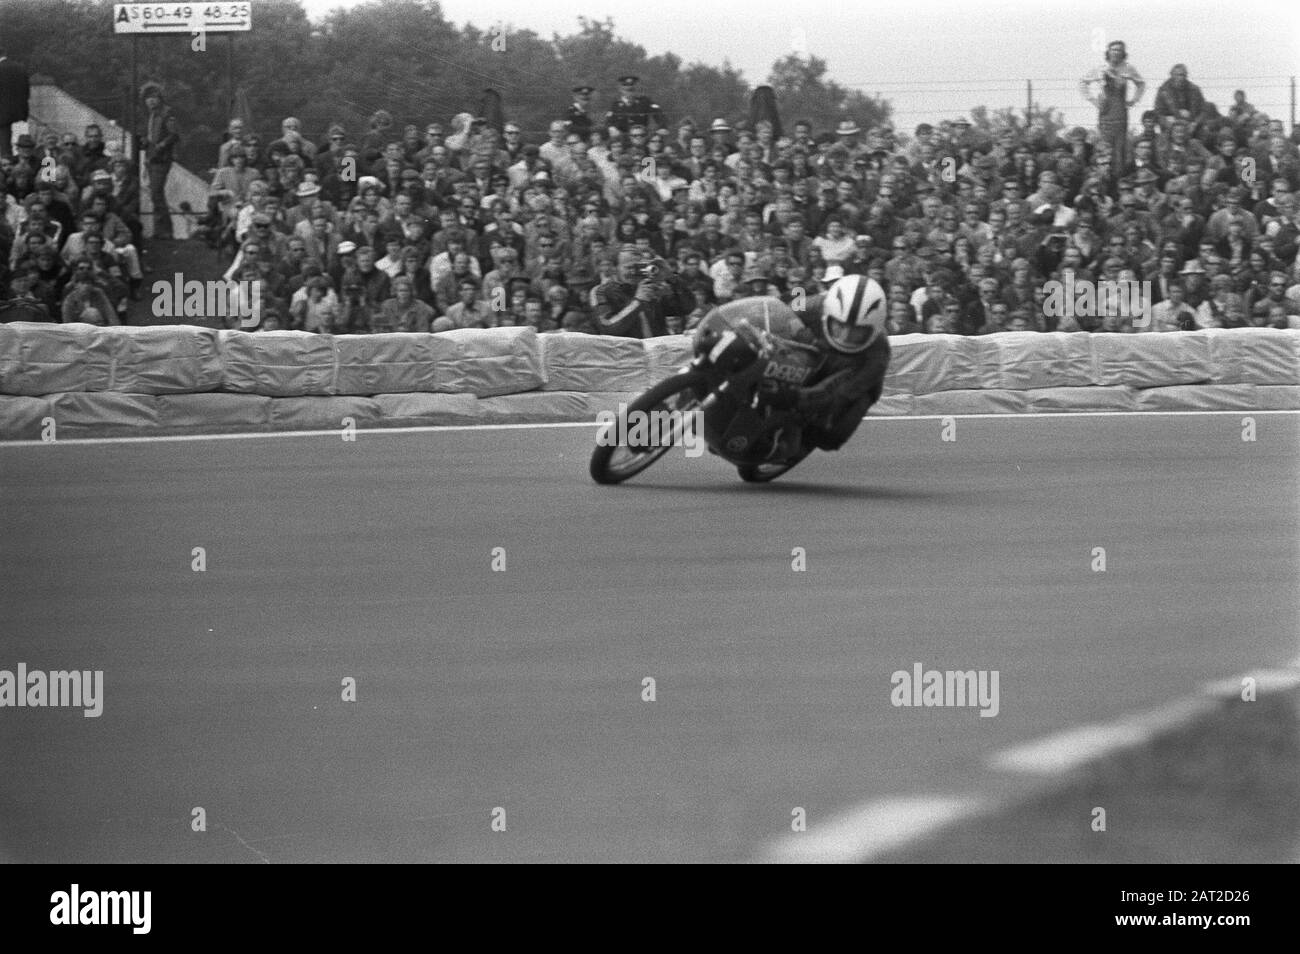 TT Assen 1972  World Champion Angel Nieto from Spain at the Derbi (also from Spain) in action in the 125cc class Date: 24 June 1972 Location: Assen, Drenthe Keywords: circuits, motorcycle drivers, motorcycles, motorsports, public, races Personal name: Nieto, Angel Stock Photo